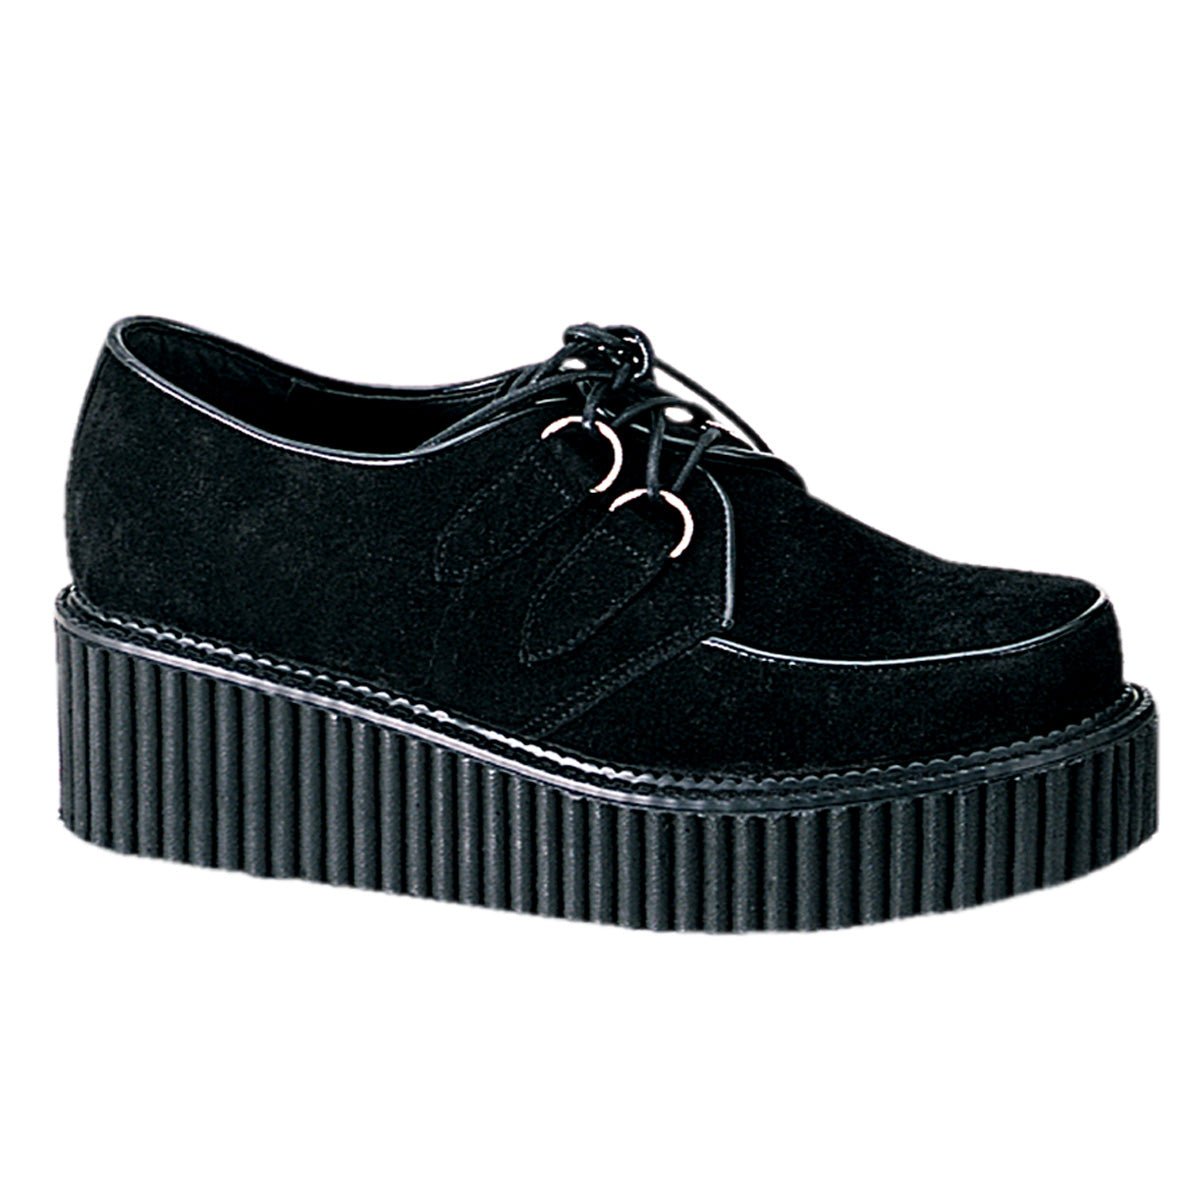 Clearance Creeper 101 Black Suede Size 5UK/8USA - From Clearance Sold By Alternative Footwear